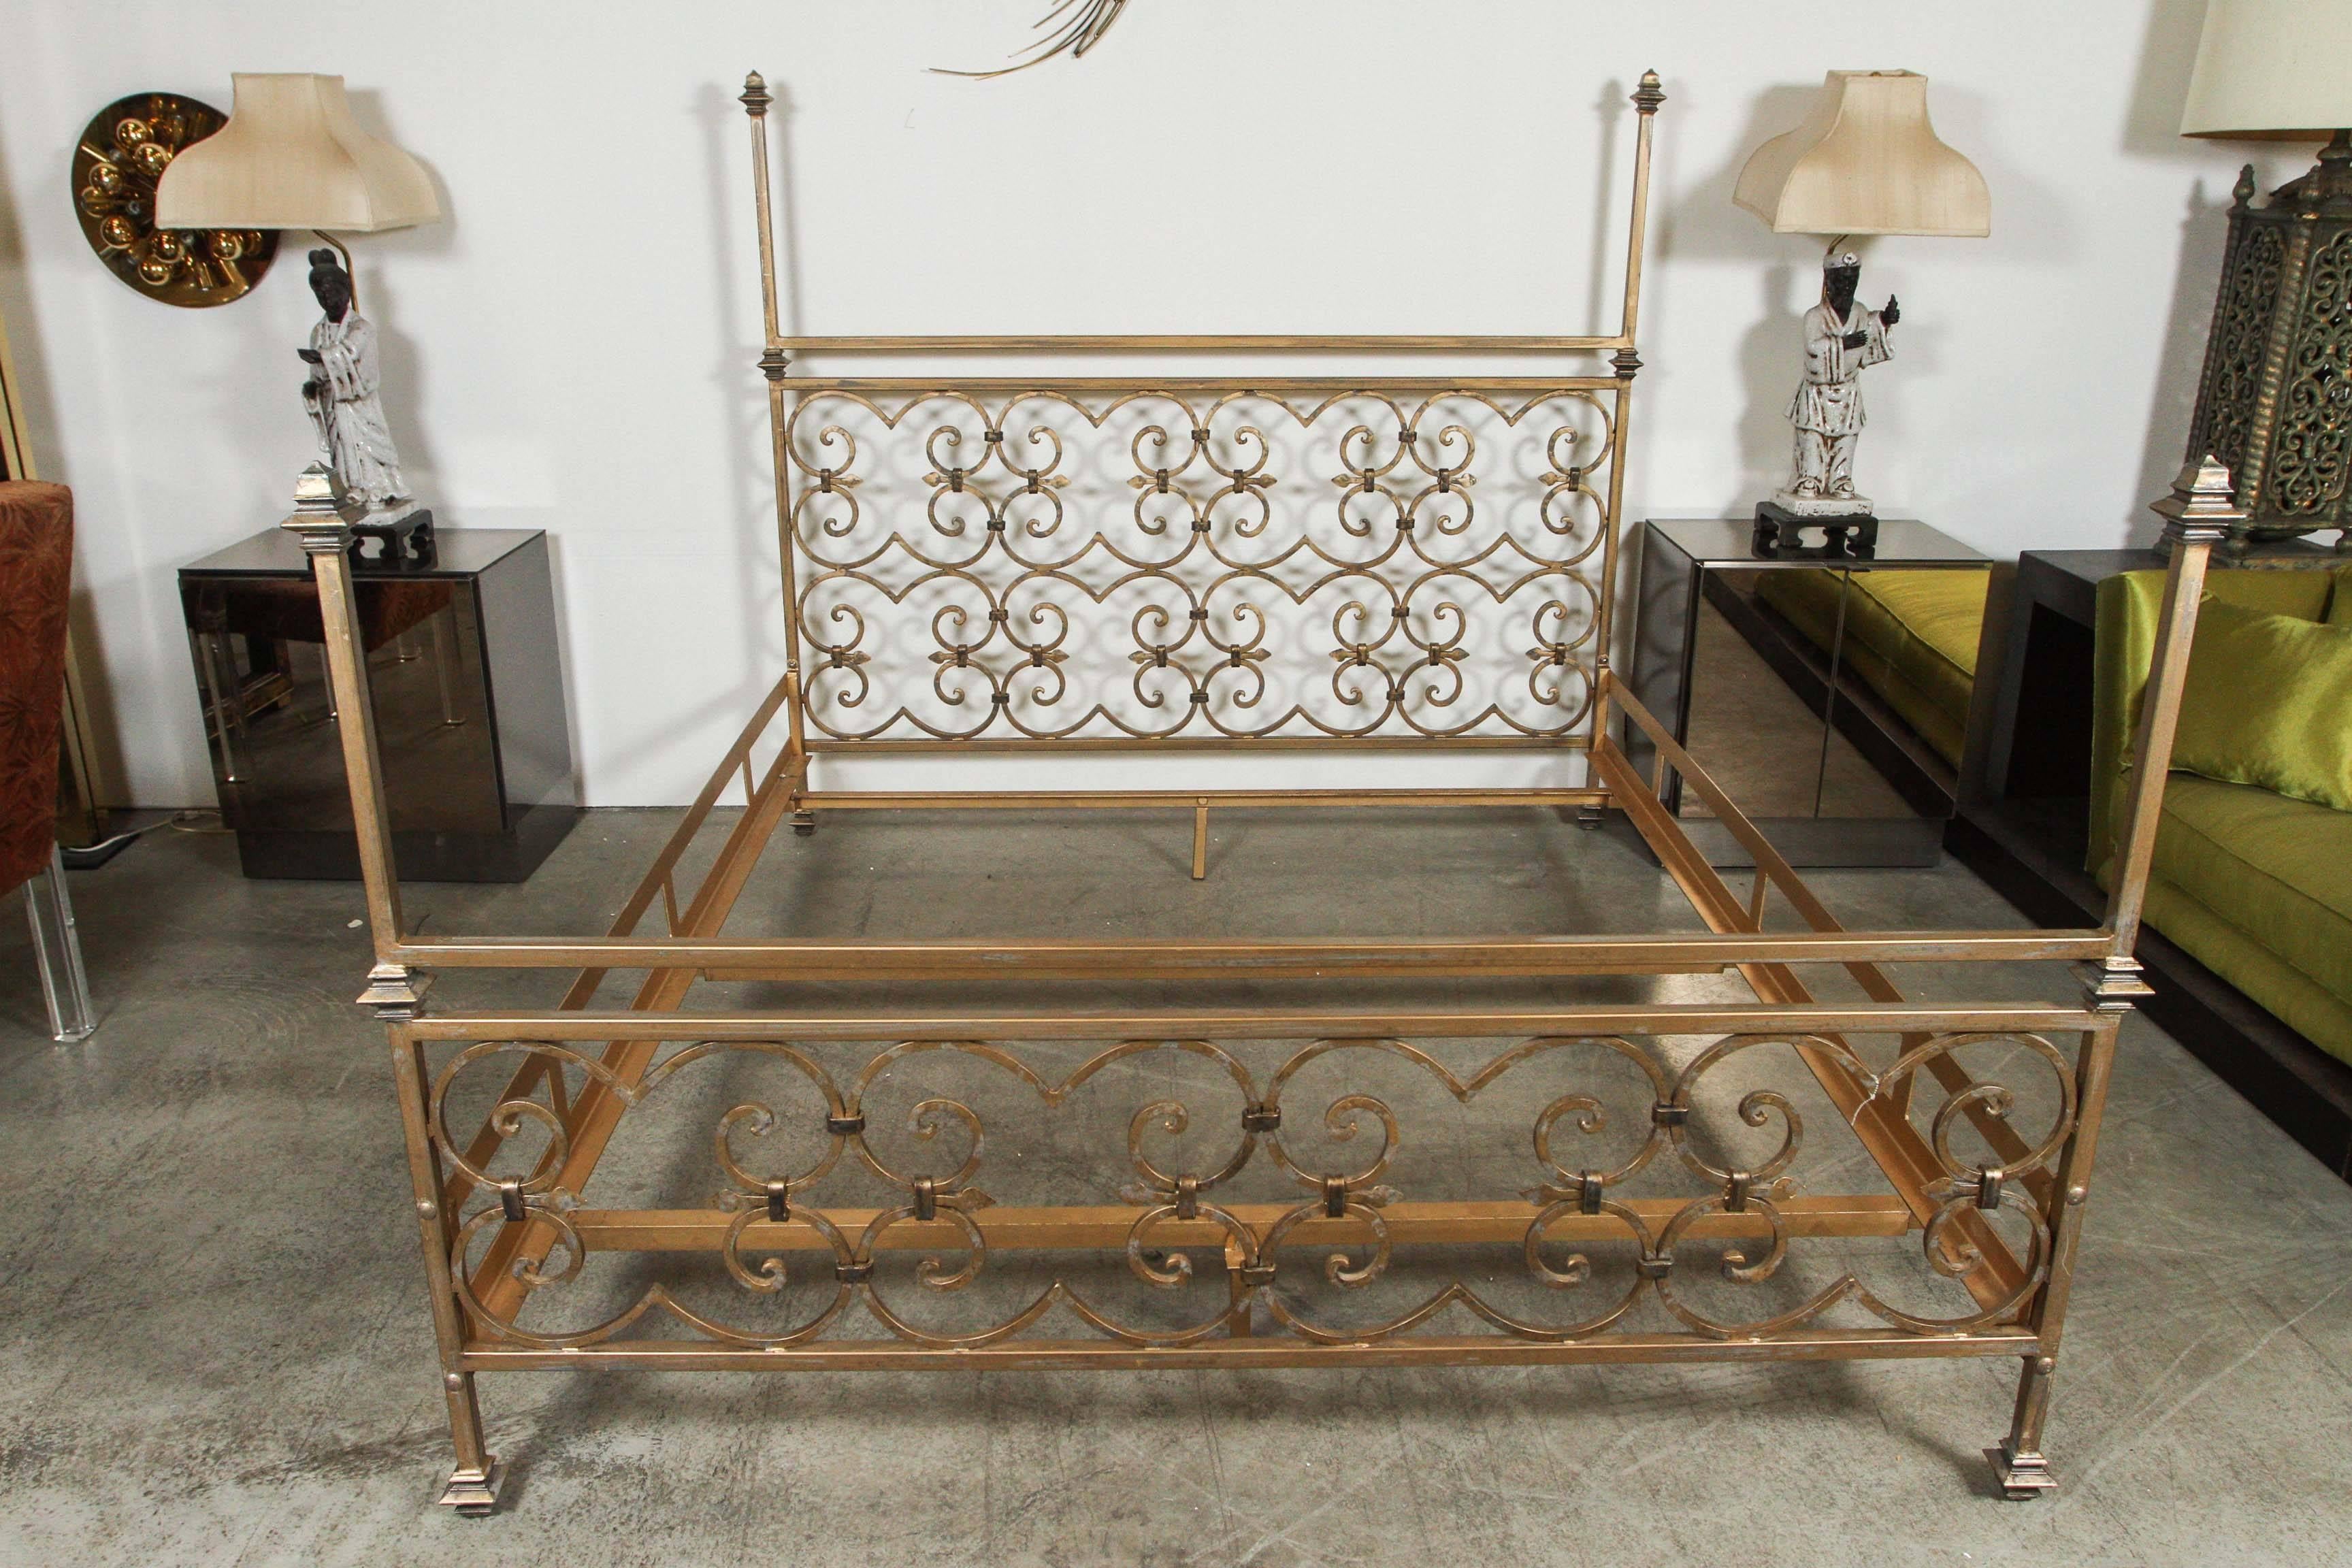 Hollywood Regency bed with decorative scrollwork in the style of Nancy Corzine.
The steel construction is heavy and very sturdy with wonderful detailing to the head and foot boards.
The painted finish in shades of gold, tan and gray has a mottled